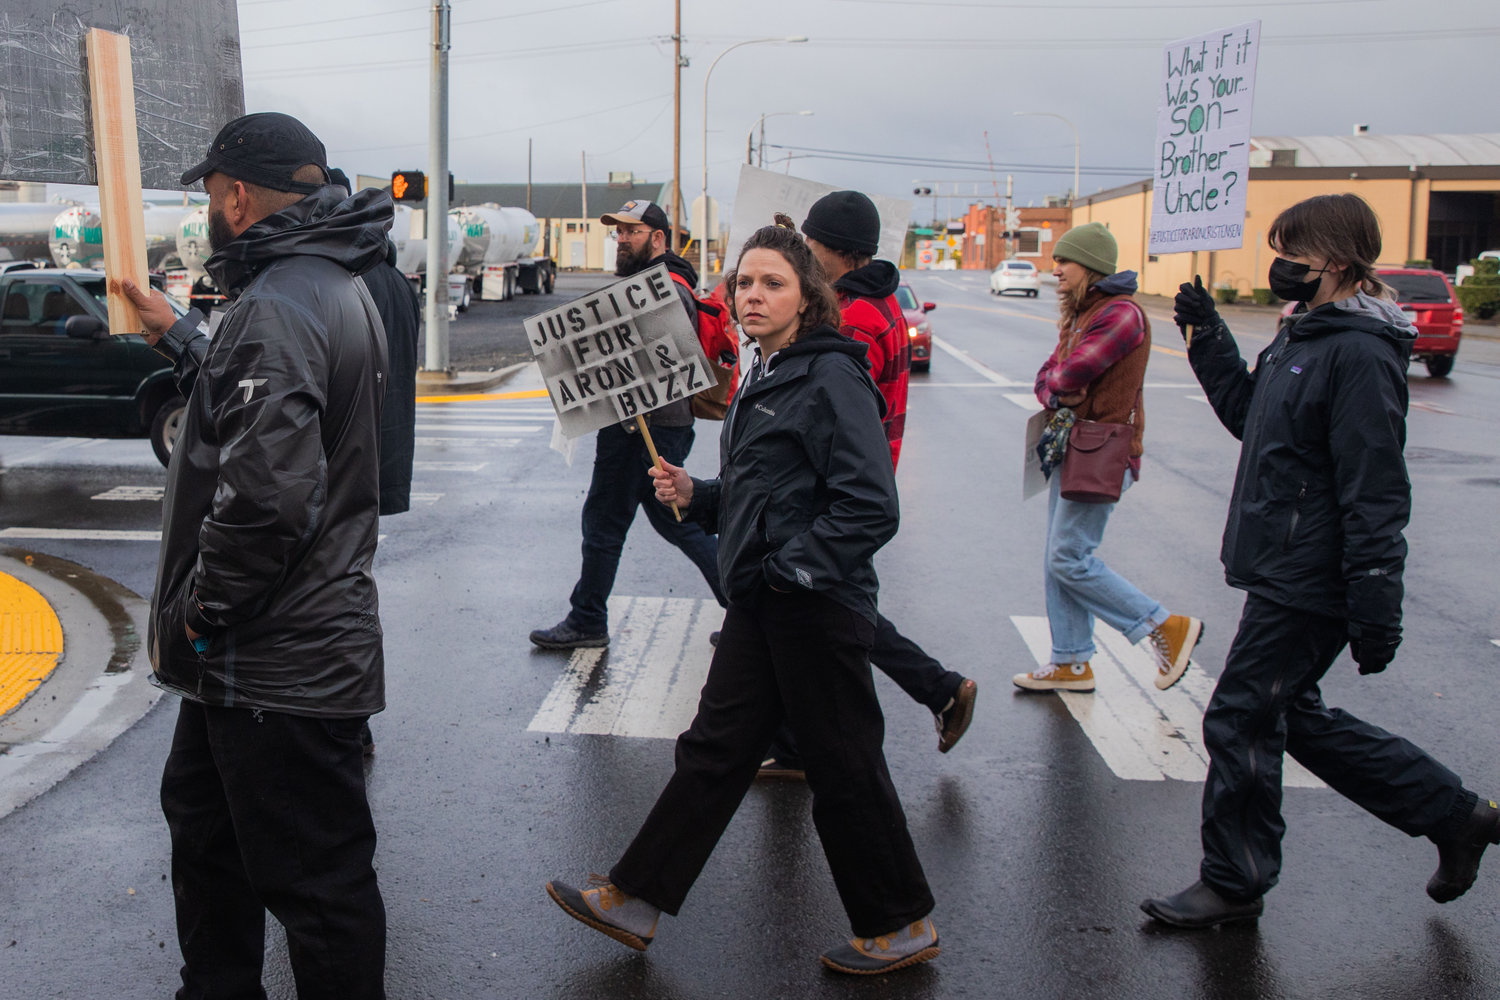 Demonstrators walk through the rain to the Lewis County Law and Justice Center in Chehalis on Saturday while demanding justice for Aron Christensen and his dog Buzz.